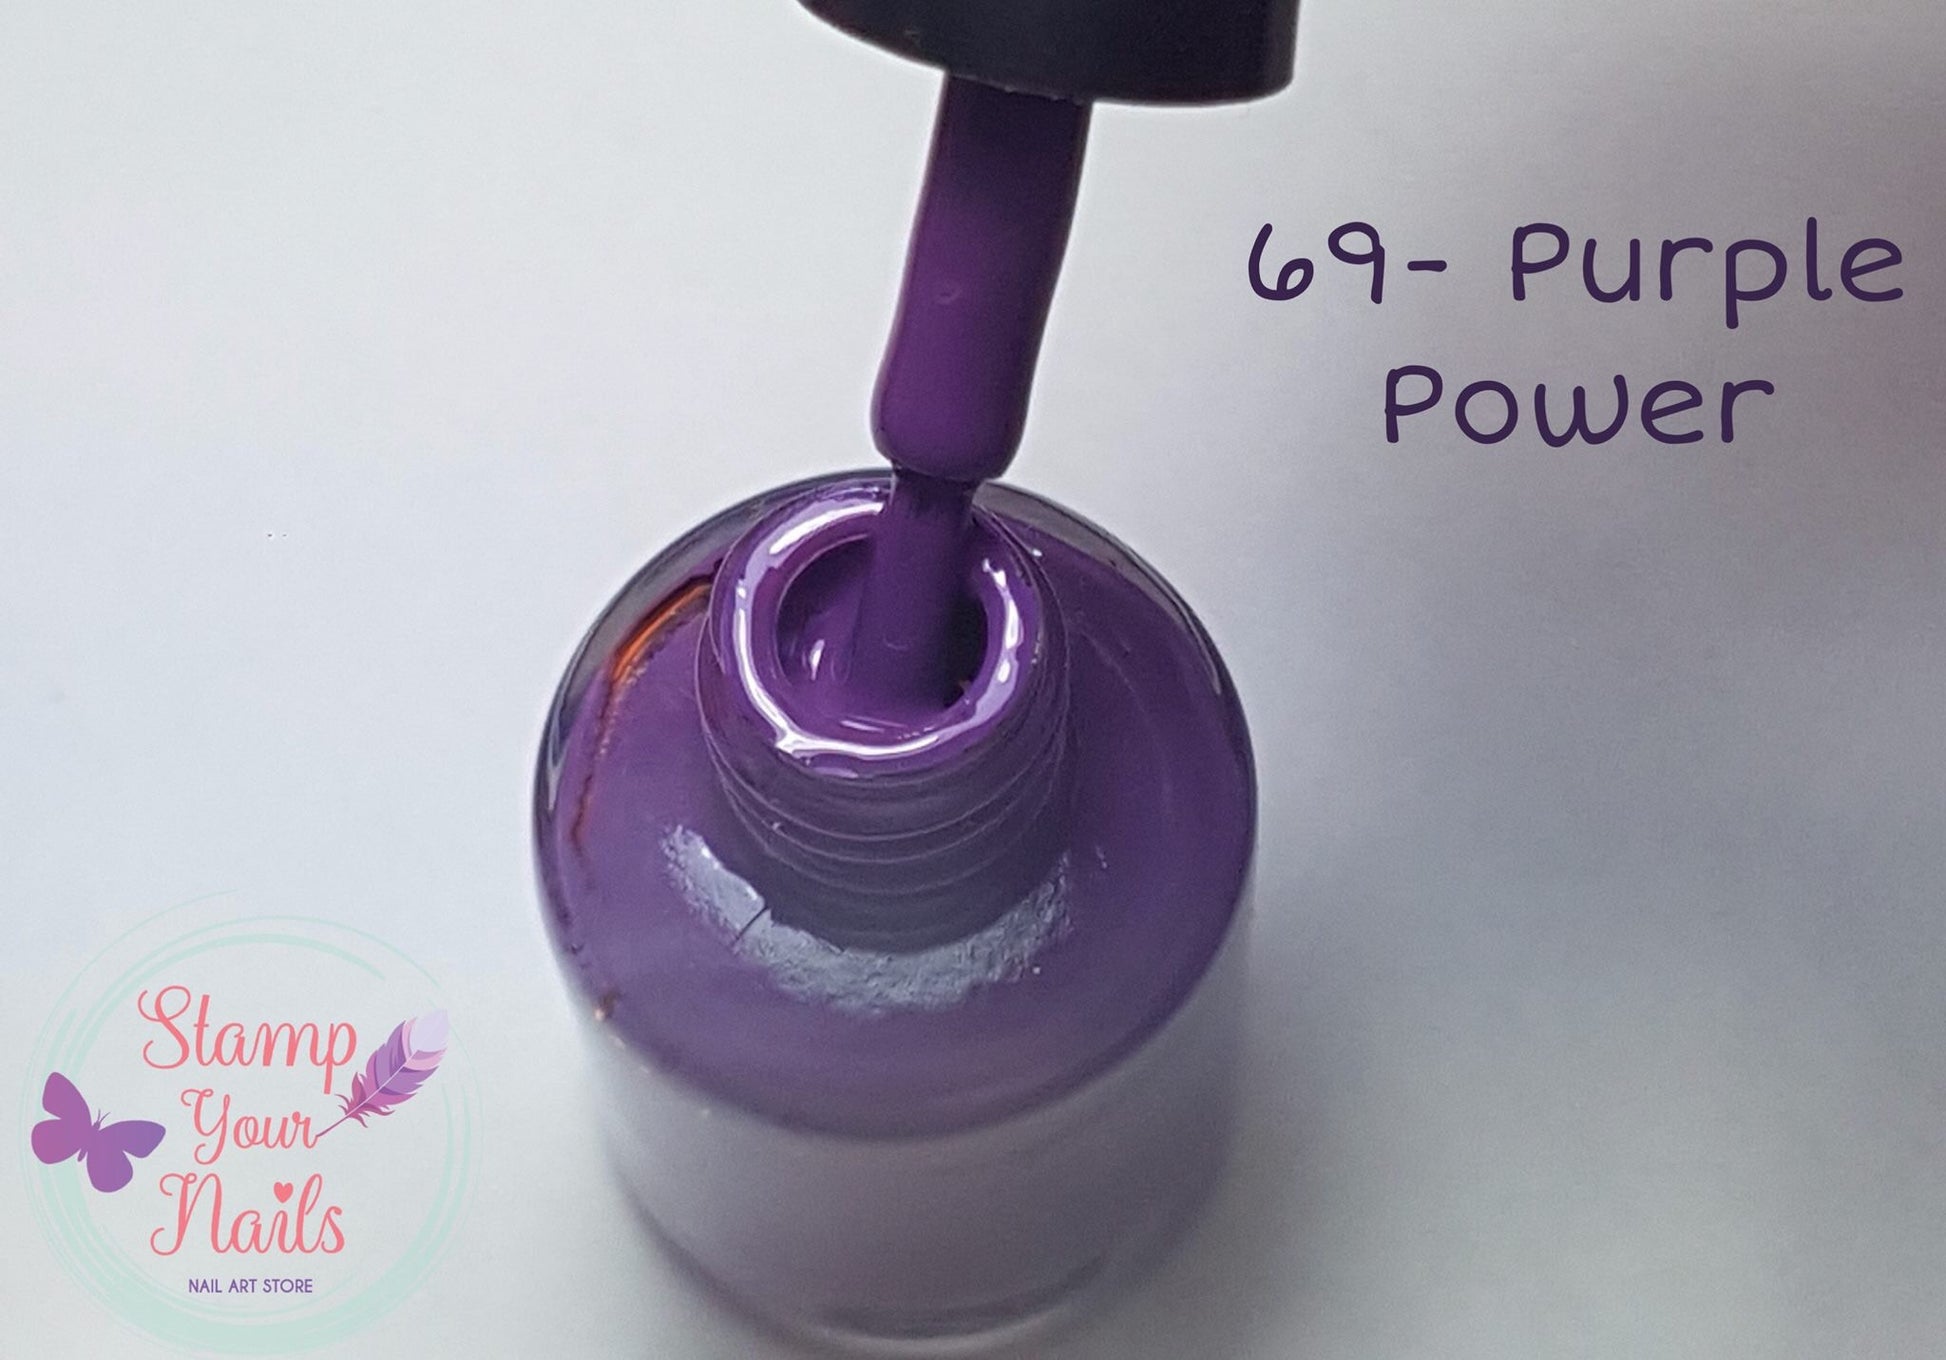 69 Purple Power - Stamp your nails